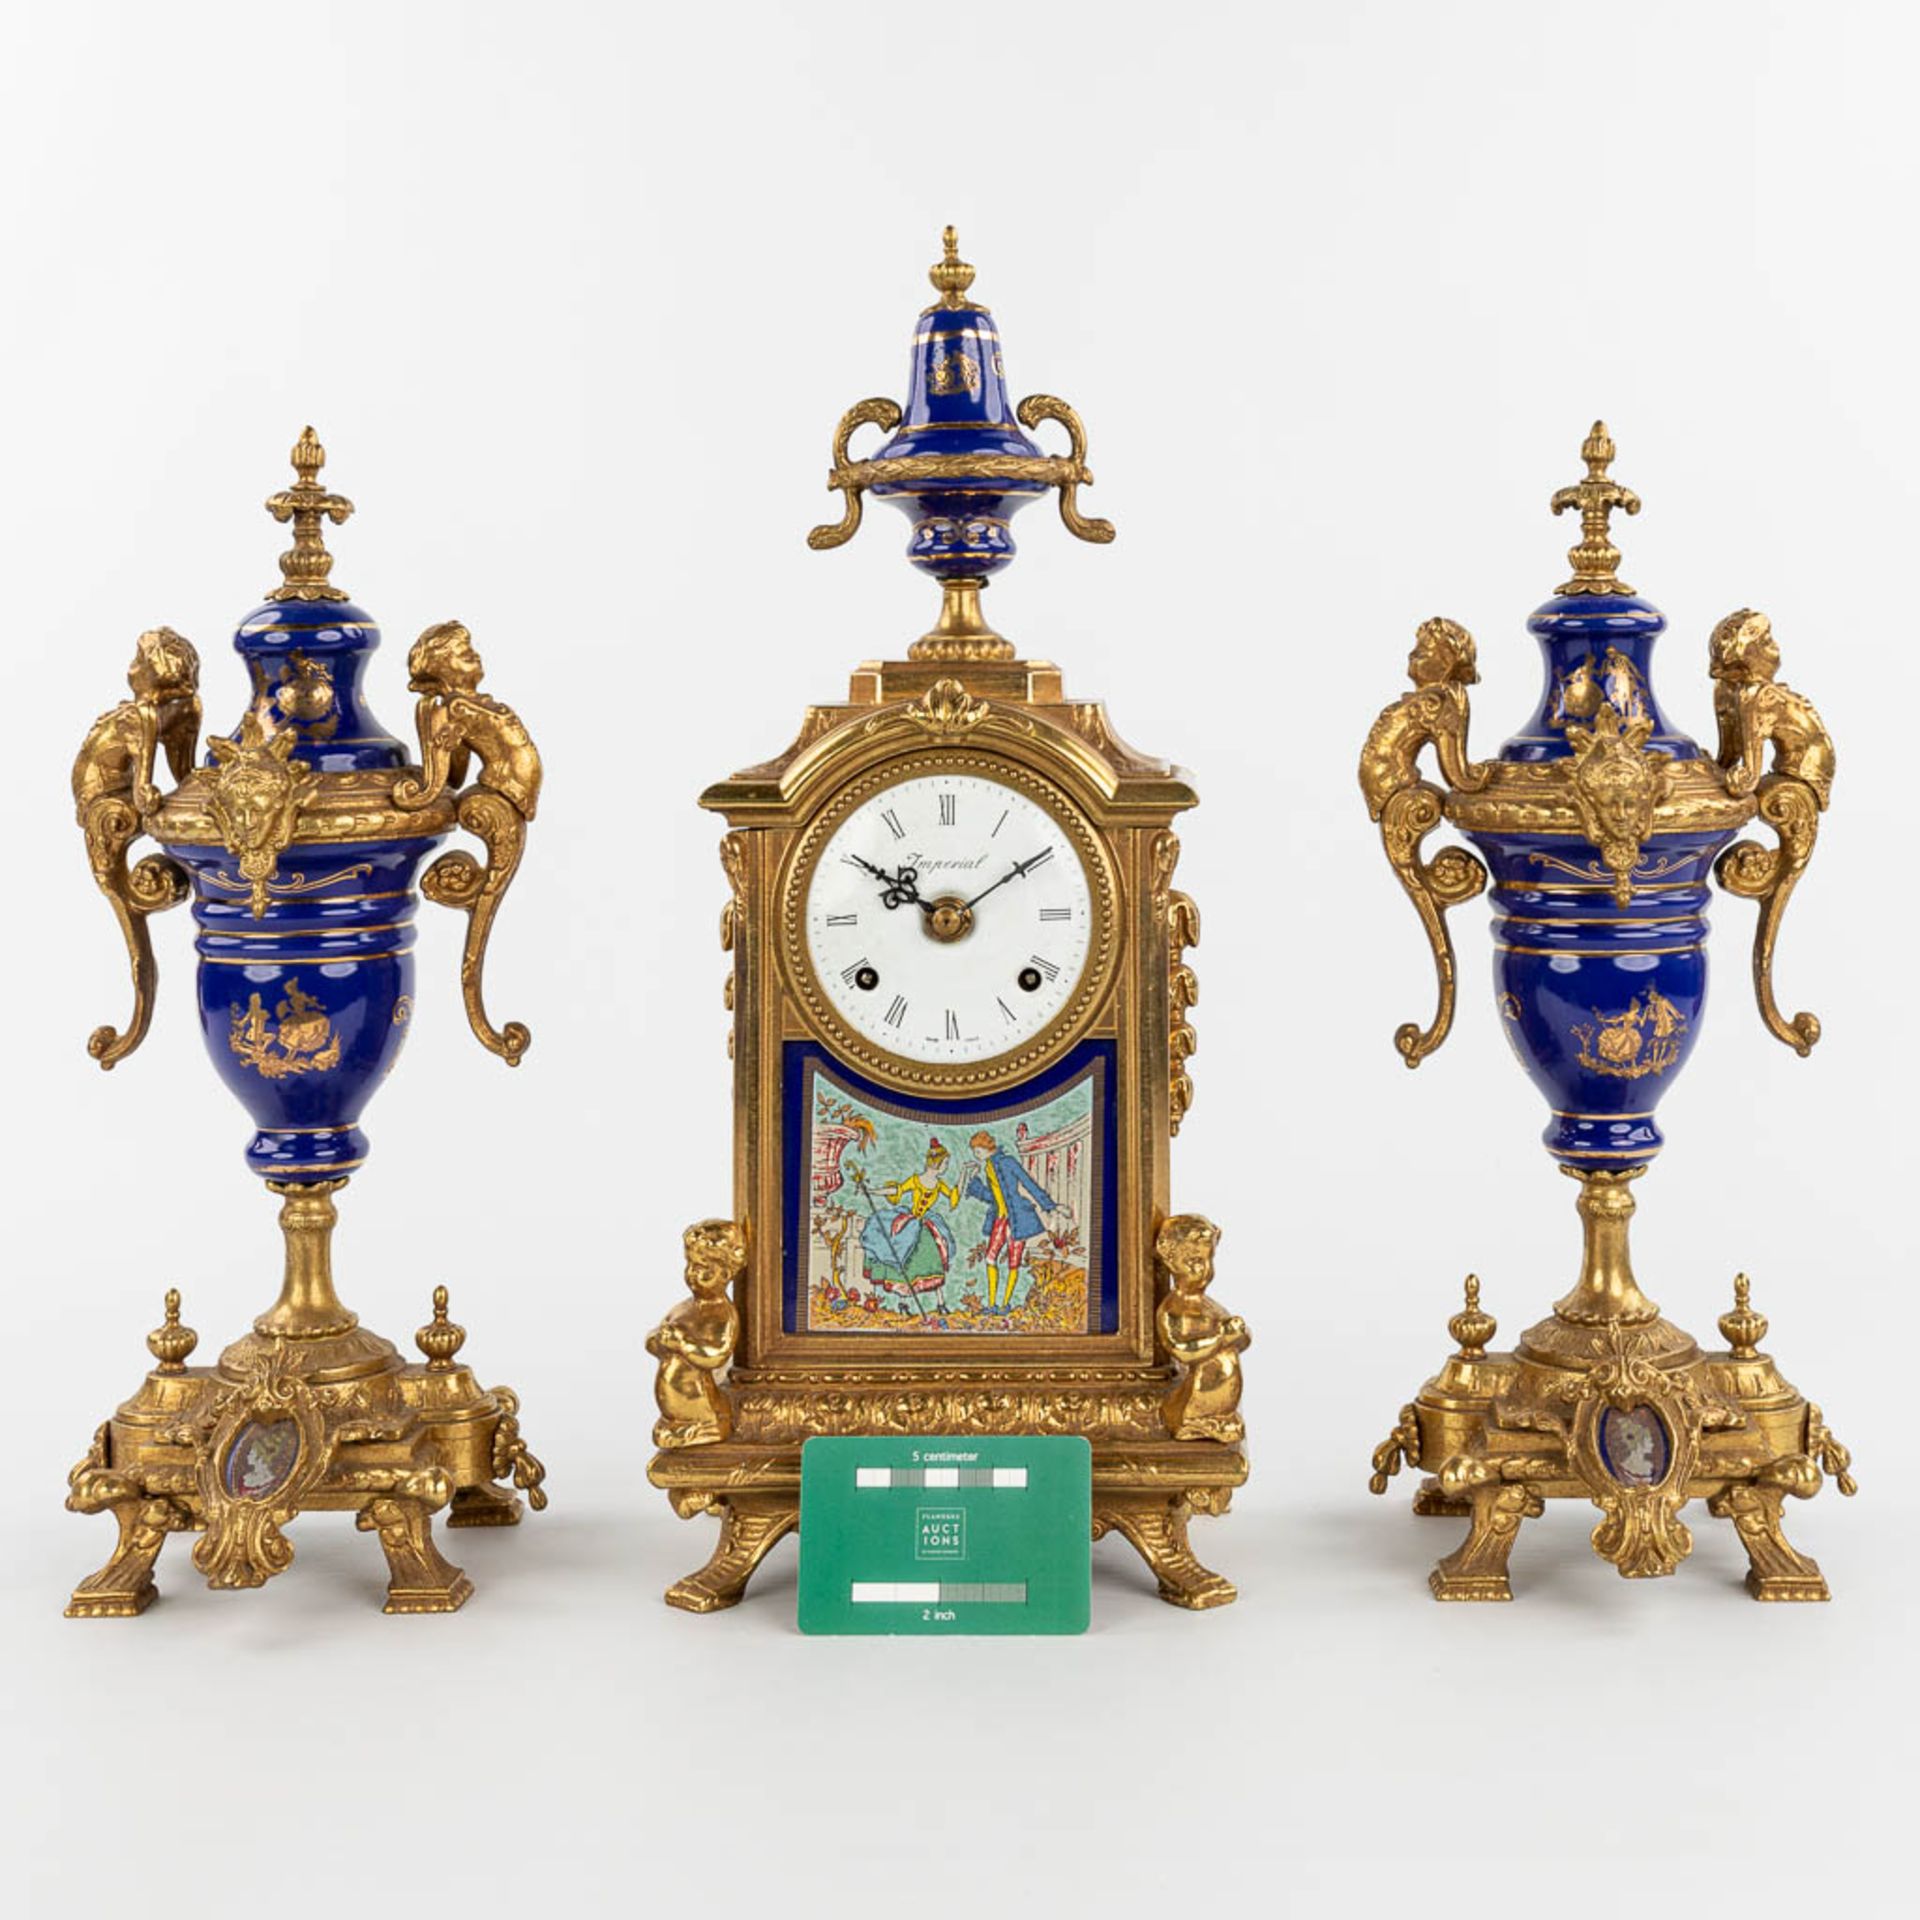 A three-piece mantle garniture clock made of bronze and porcelain and marked Imperial. (H:43cm) - Image 2 of 12